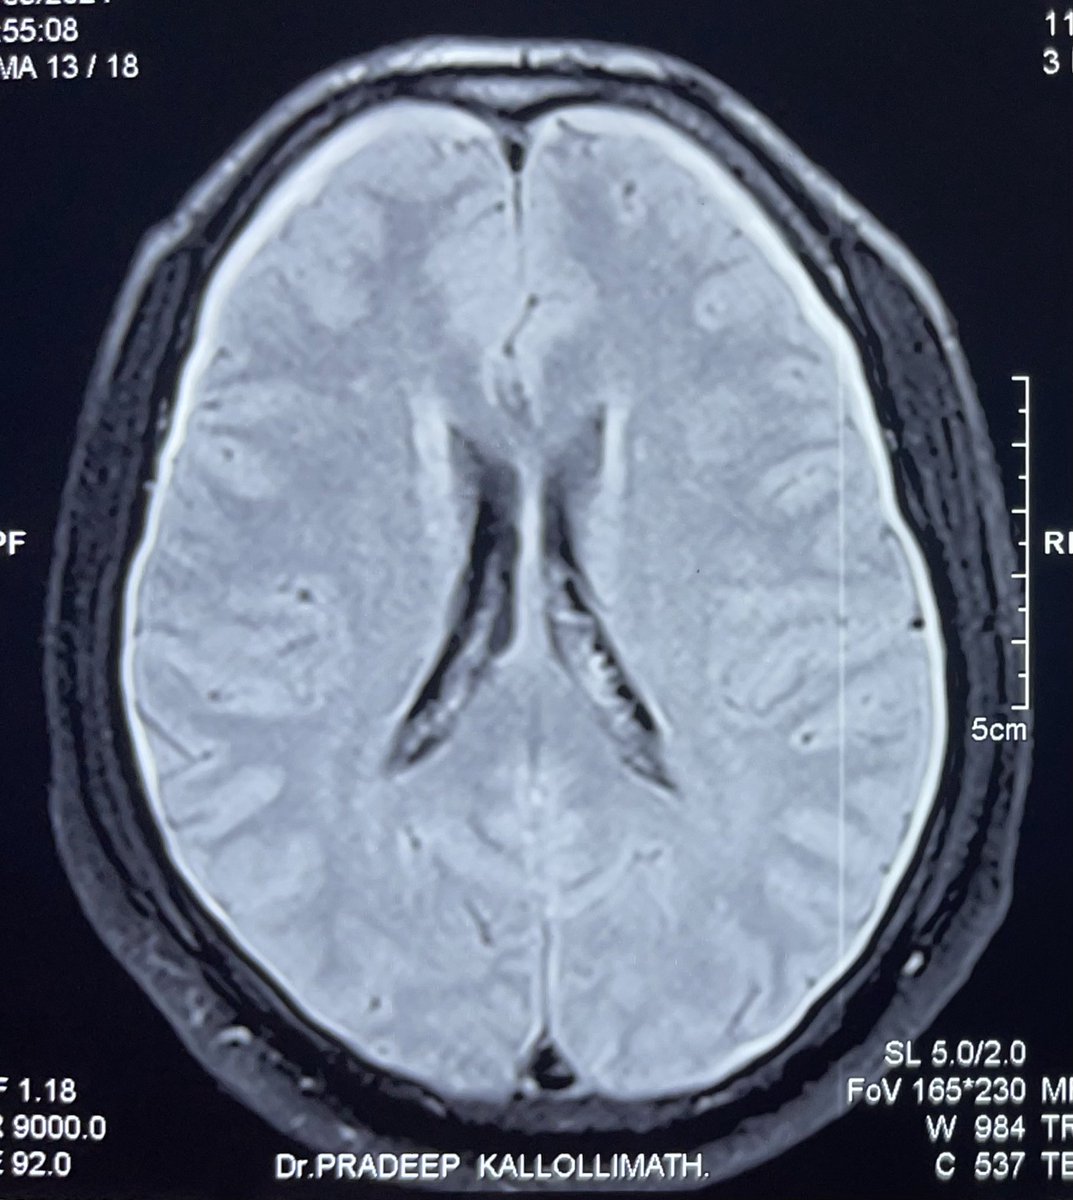 51 years old man with severe orthostatic headache since10 days, which is relieved by lying in recumbent position. 

Diagnosis?
What are the next steps in management? 

#MedTwitter #NeuroTwitter #MedX